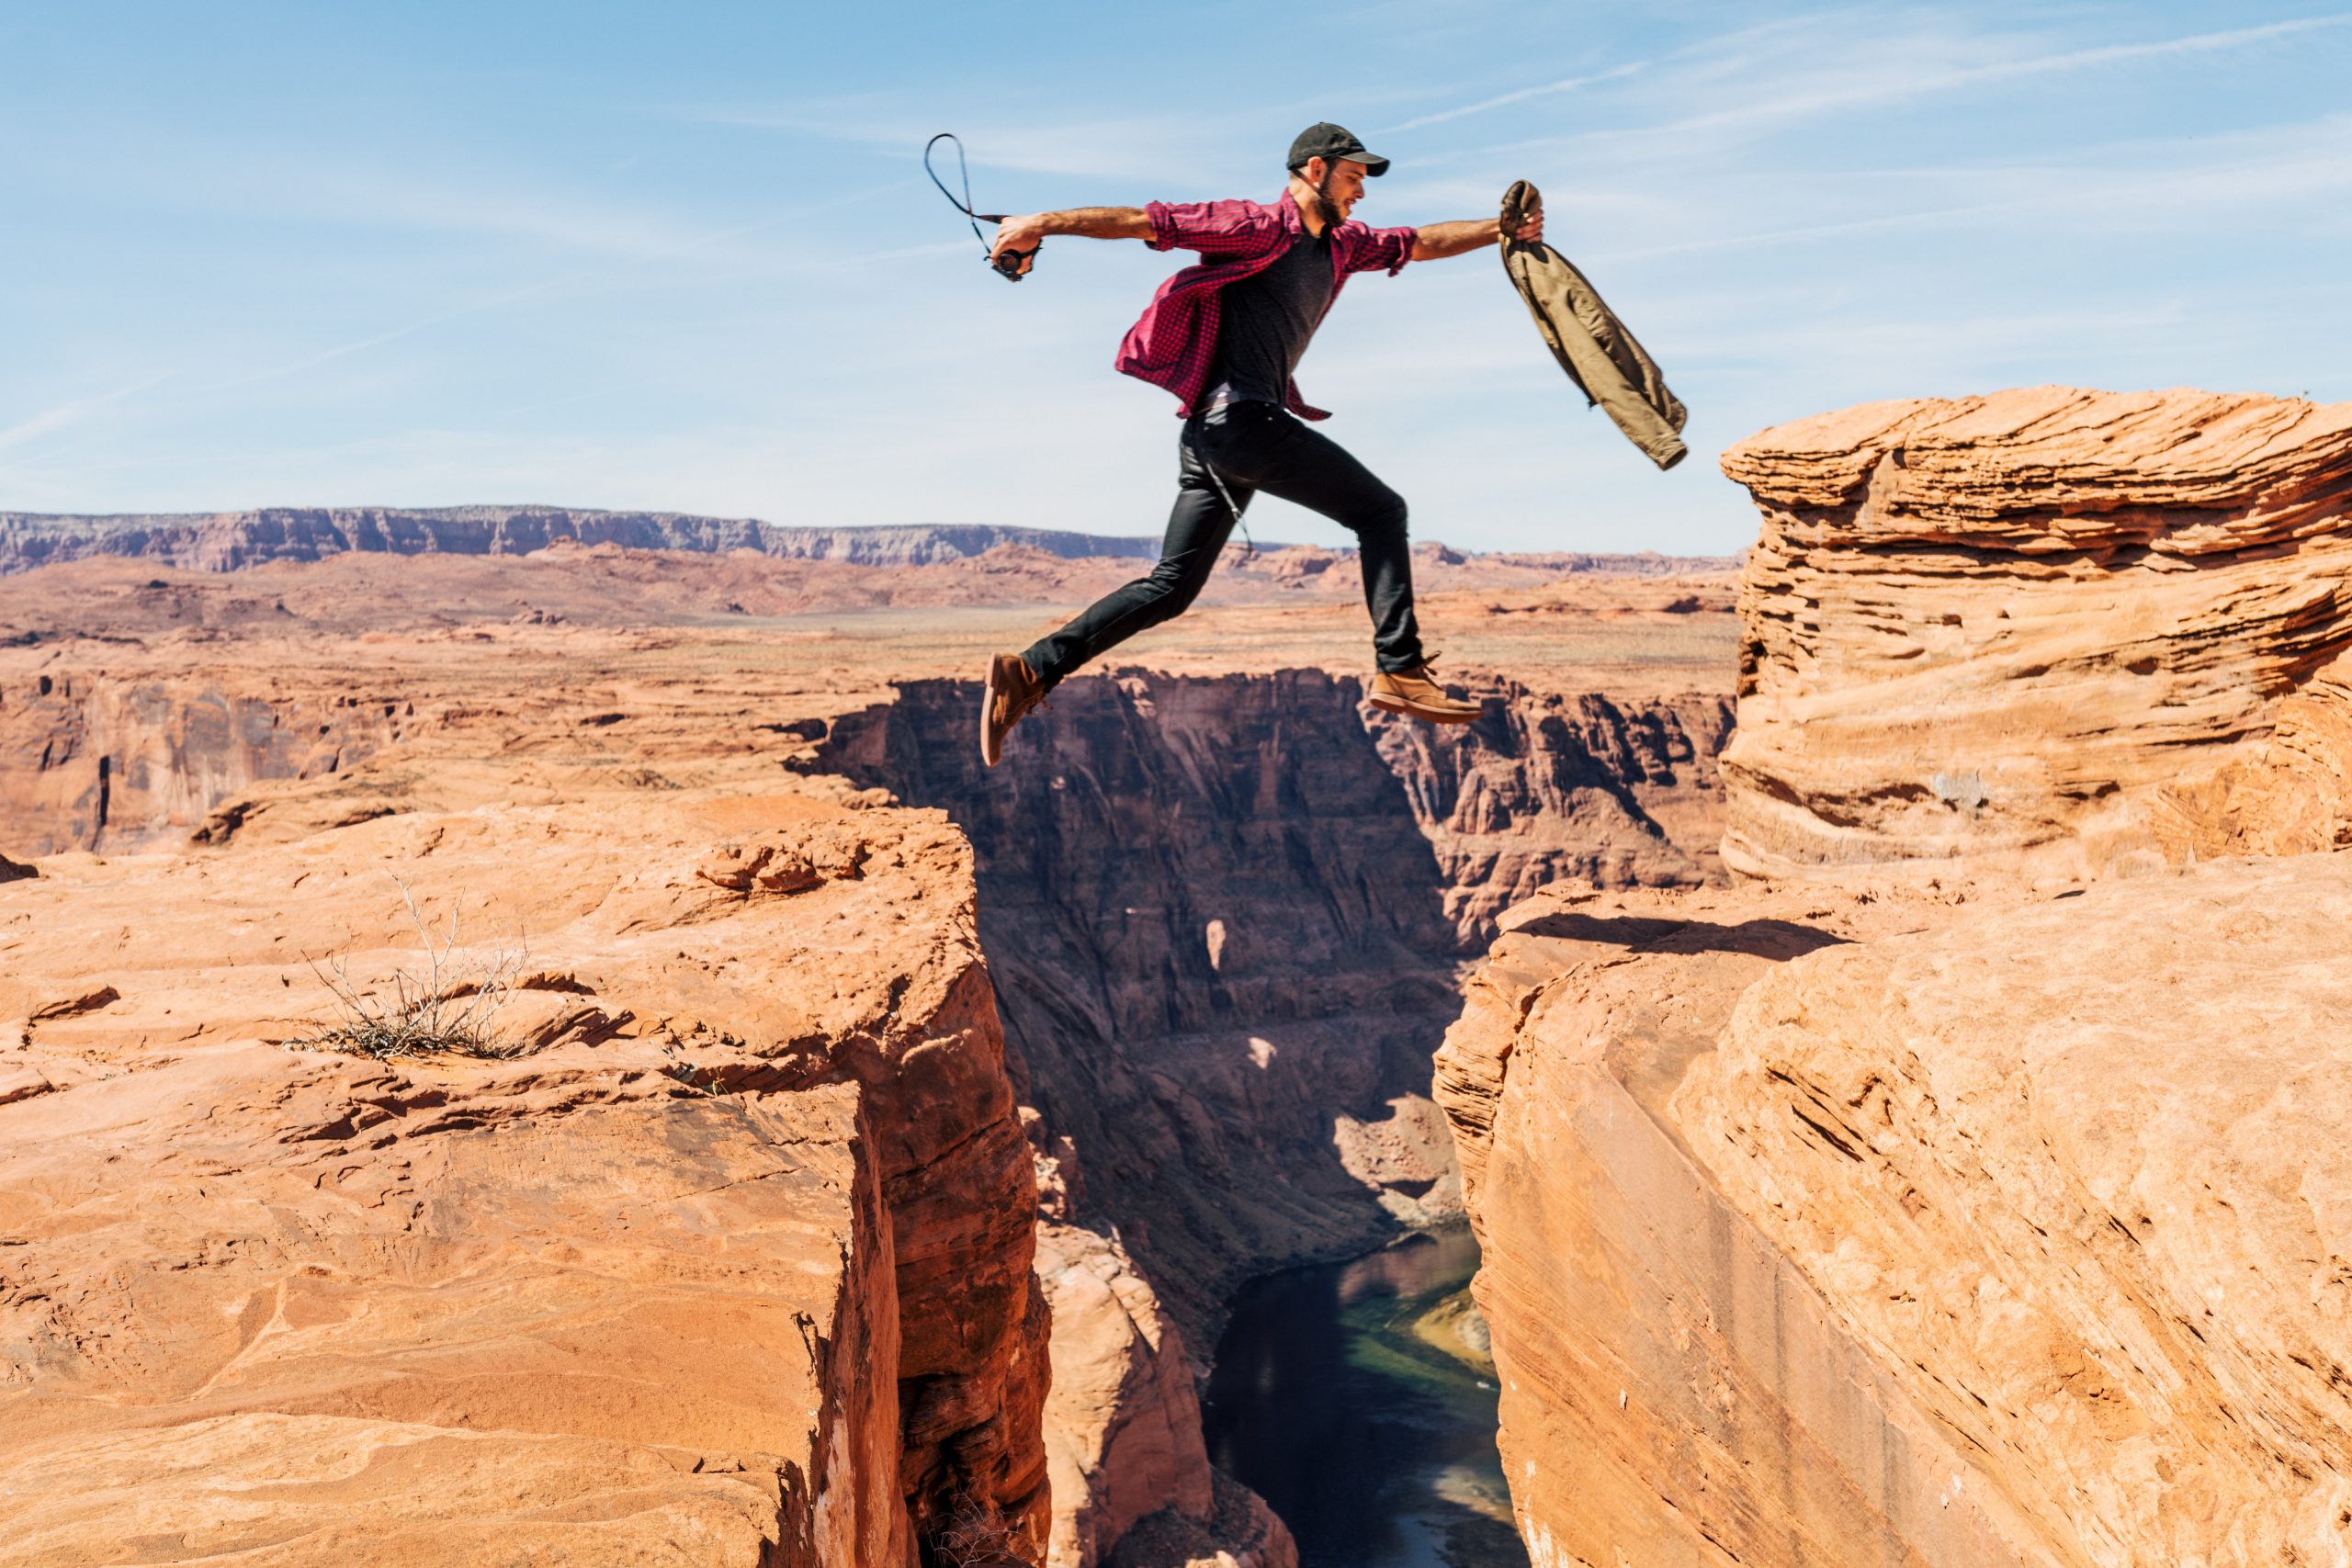 Adventurous person leaping across a canyon gap, symbolizing challenge and risk.